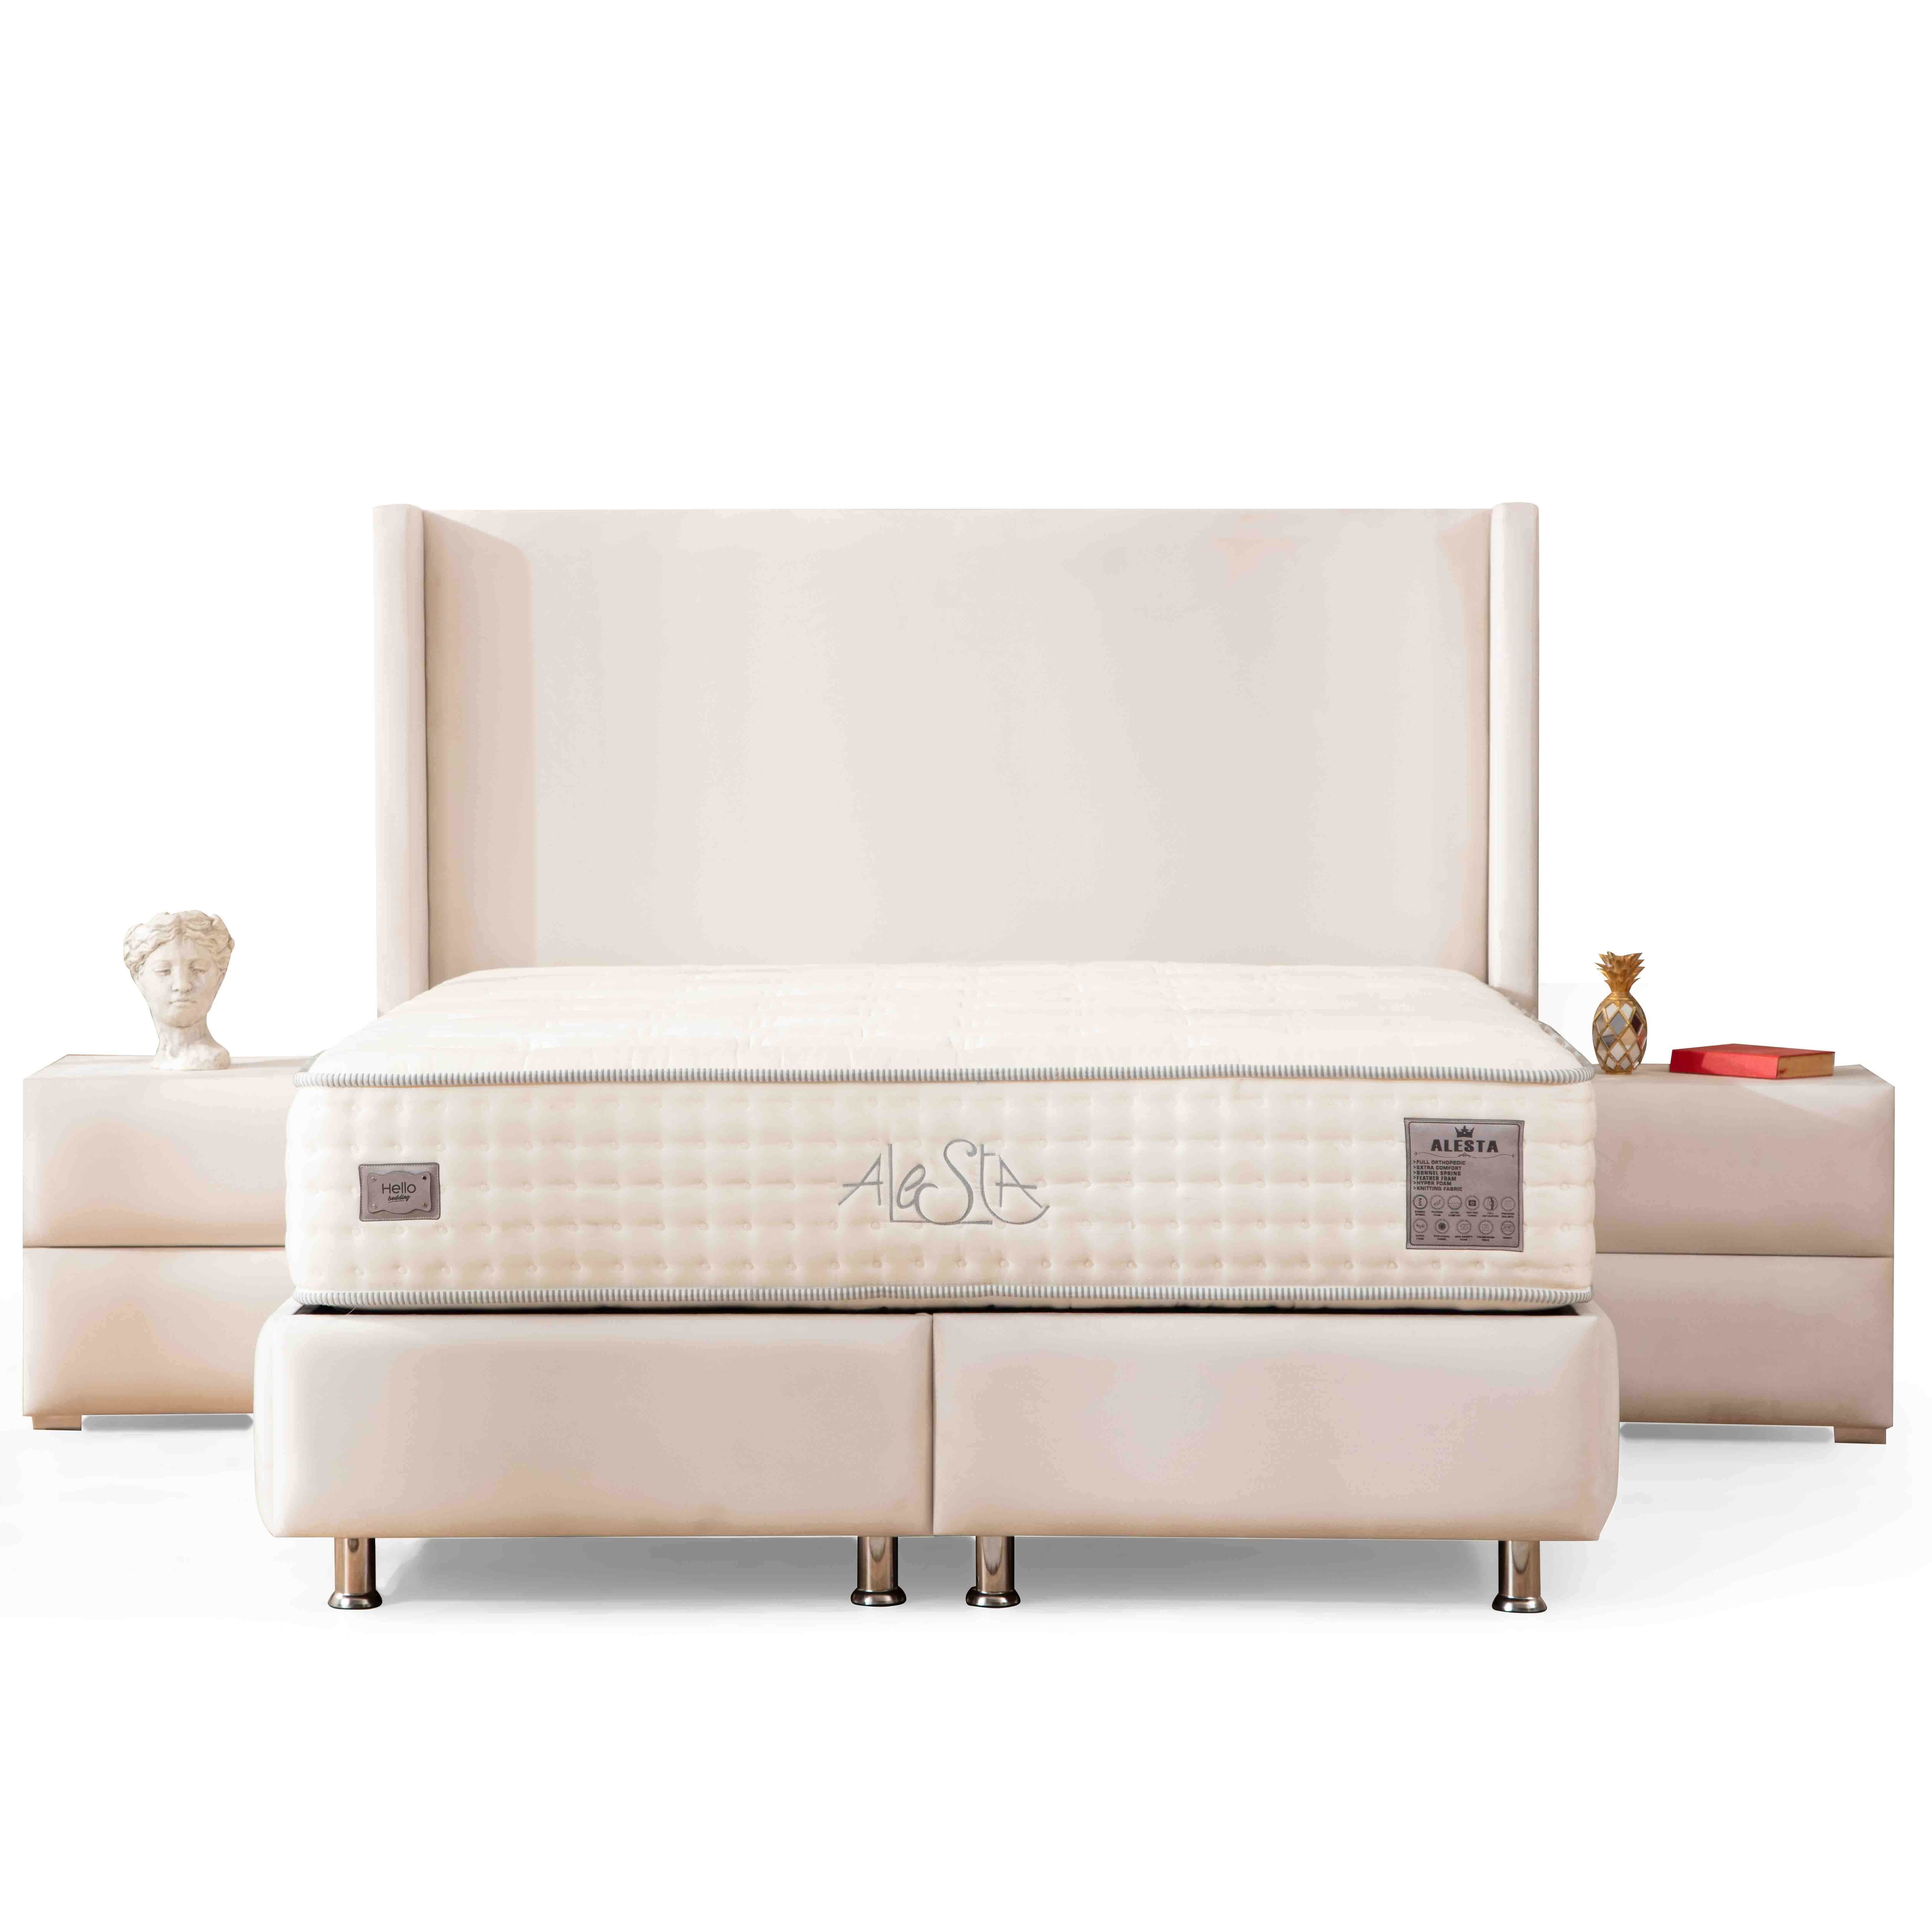 Lucca Bed With Storage 140*190